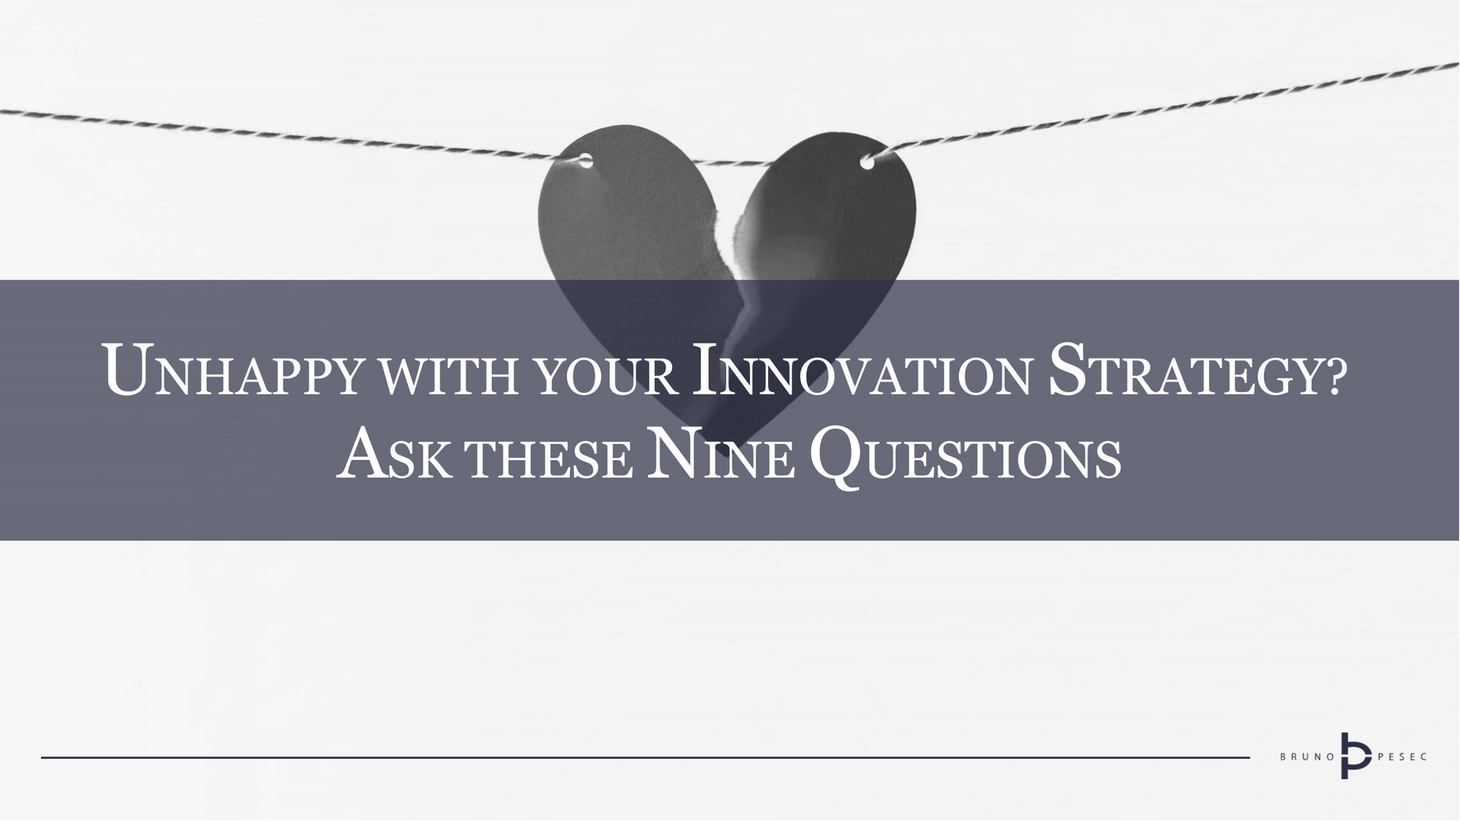 Unhappy with your innovation strategy? Ask these nine questions